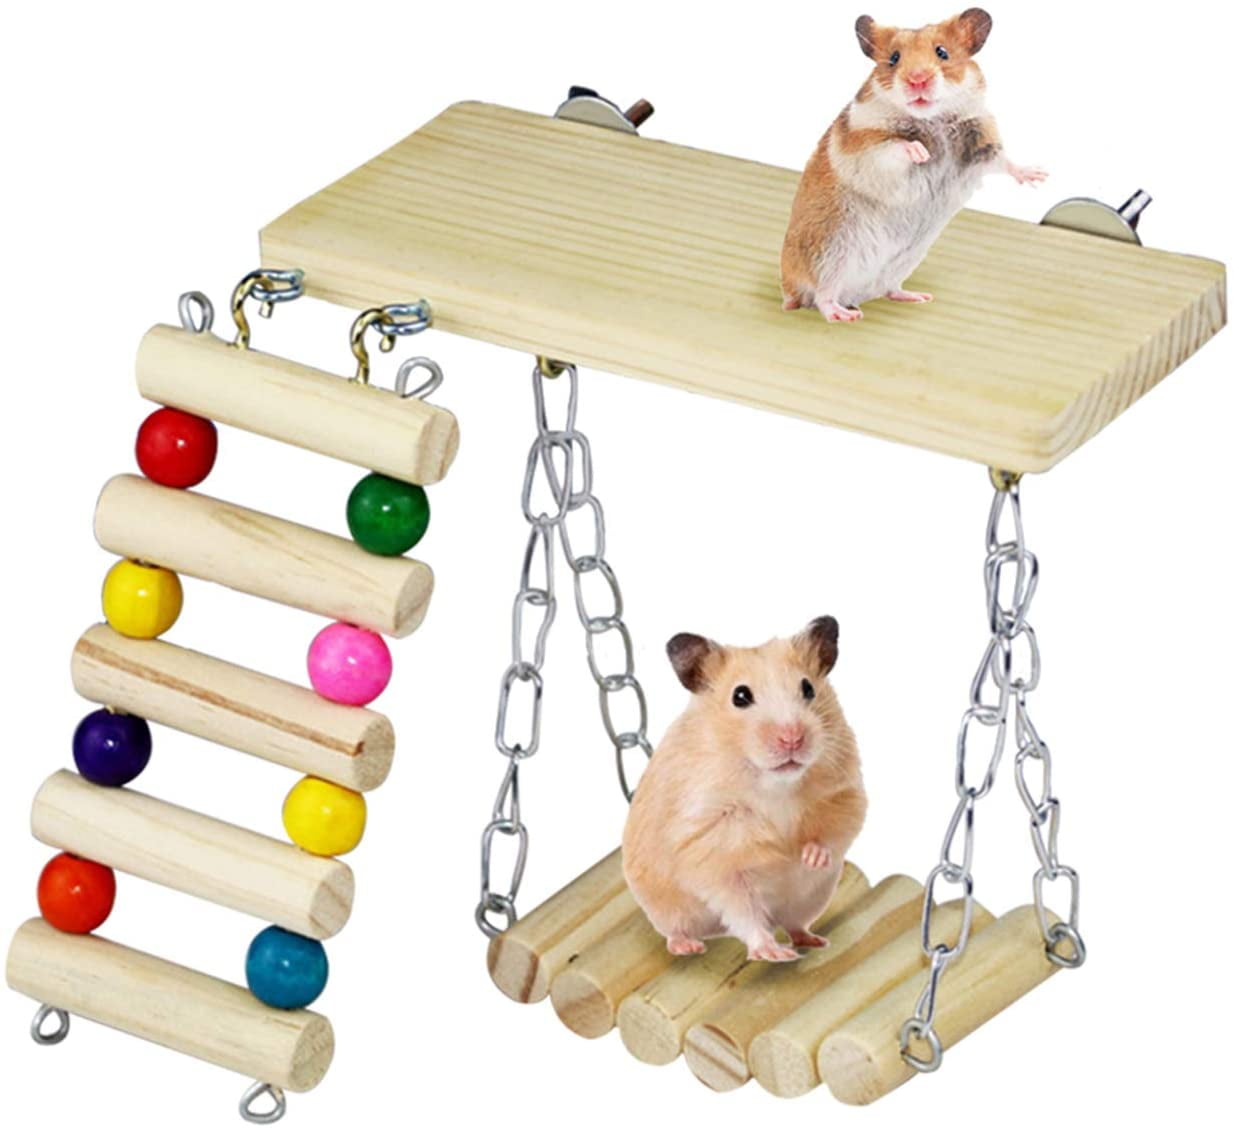 kathson Hamster Wooden Play Platform Pet Stand Platform Natural Wood Pet House Hideouts Hut with Ladder Bridge Chew Toy Cage Accessories for Syria Rat Dwarf Gerbil Chinchilla Guinea Pig Rectangle 